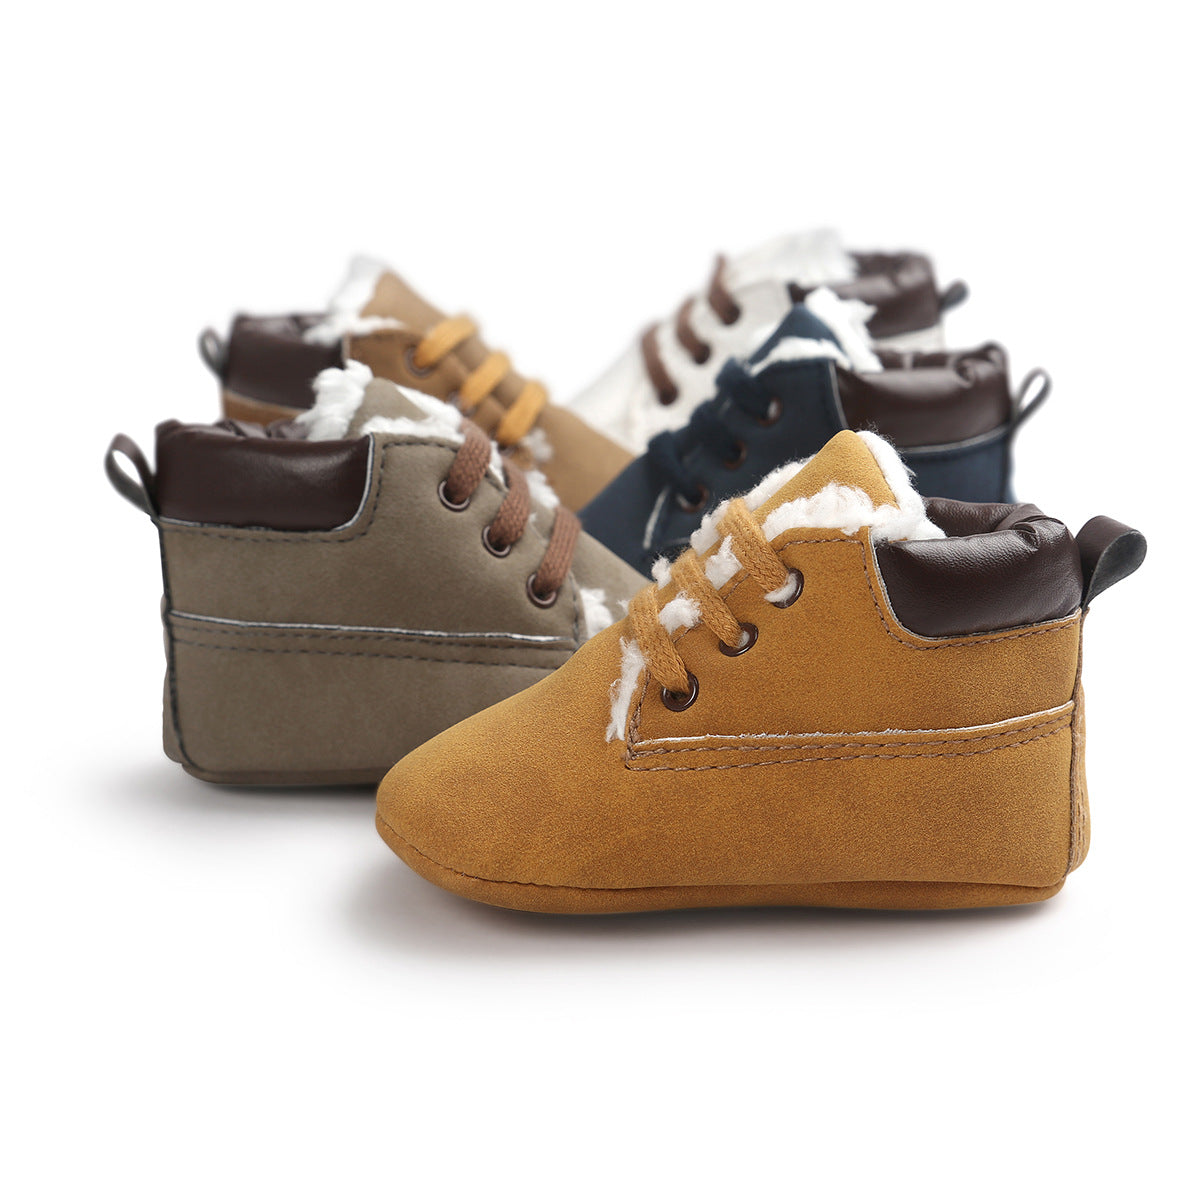 Toddler Winter Leather Sneaker